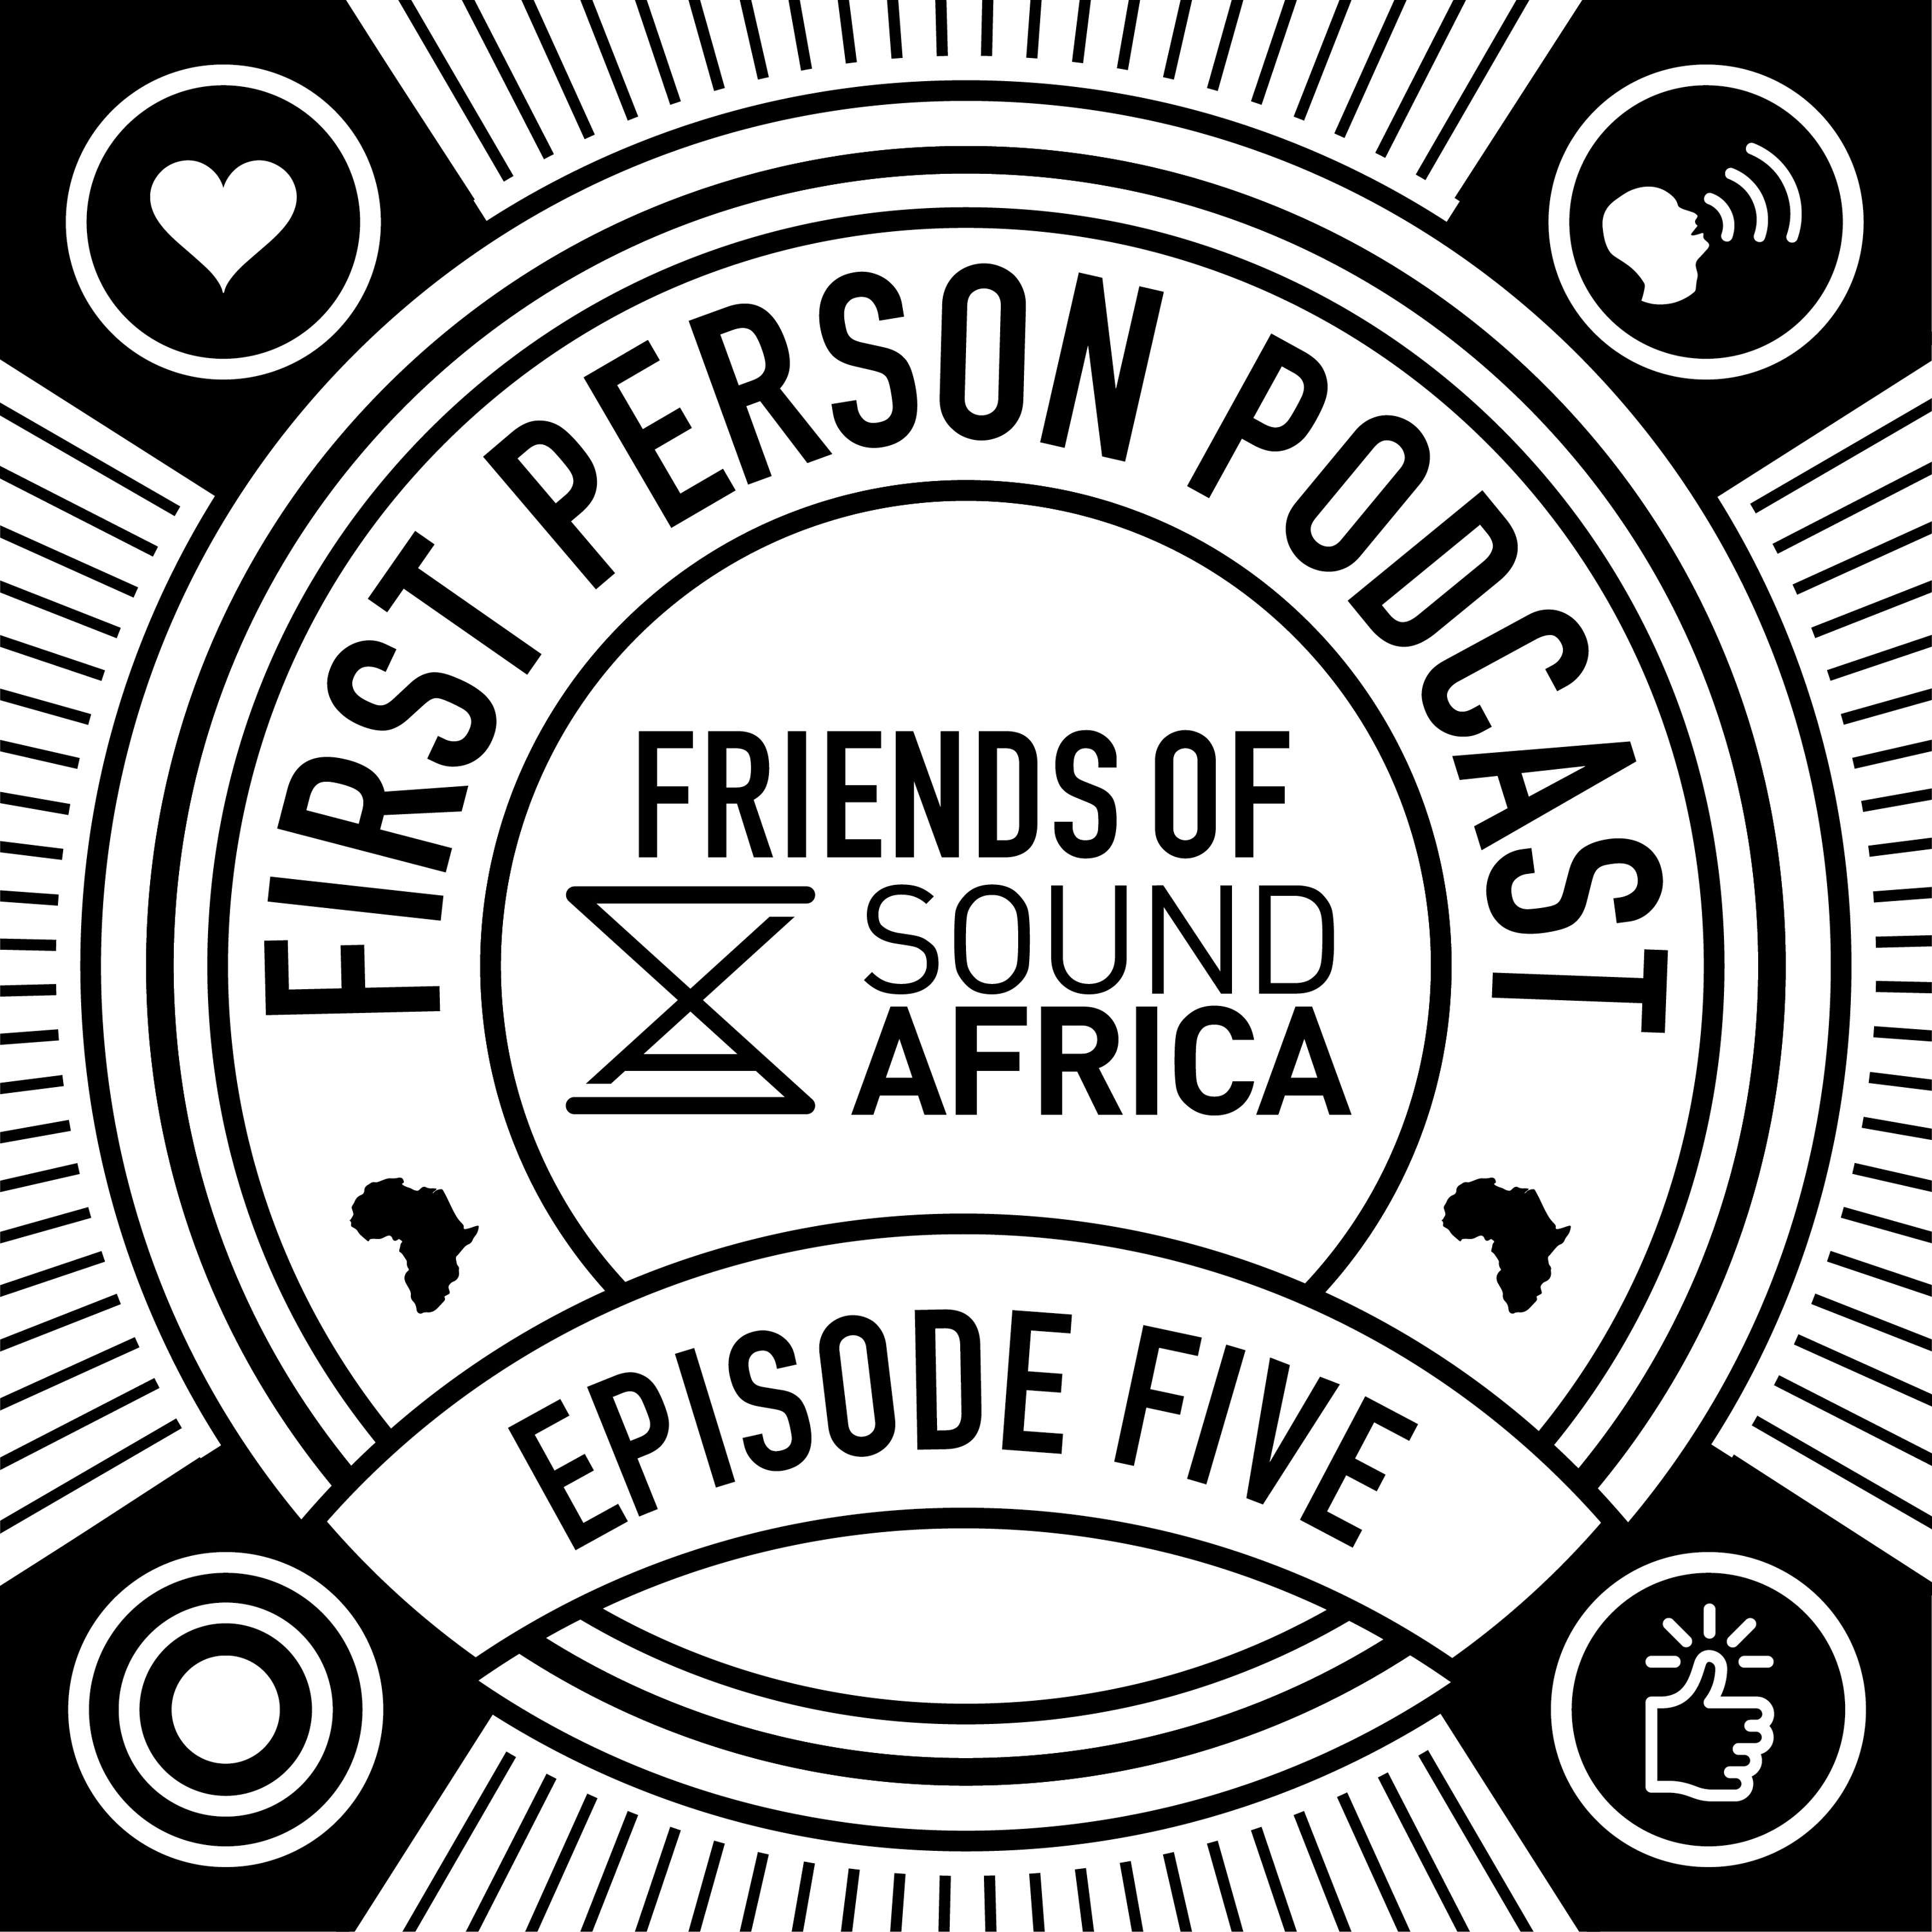 Friends of SoundAfrica Ep05 - First Person - Shrooms At 70